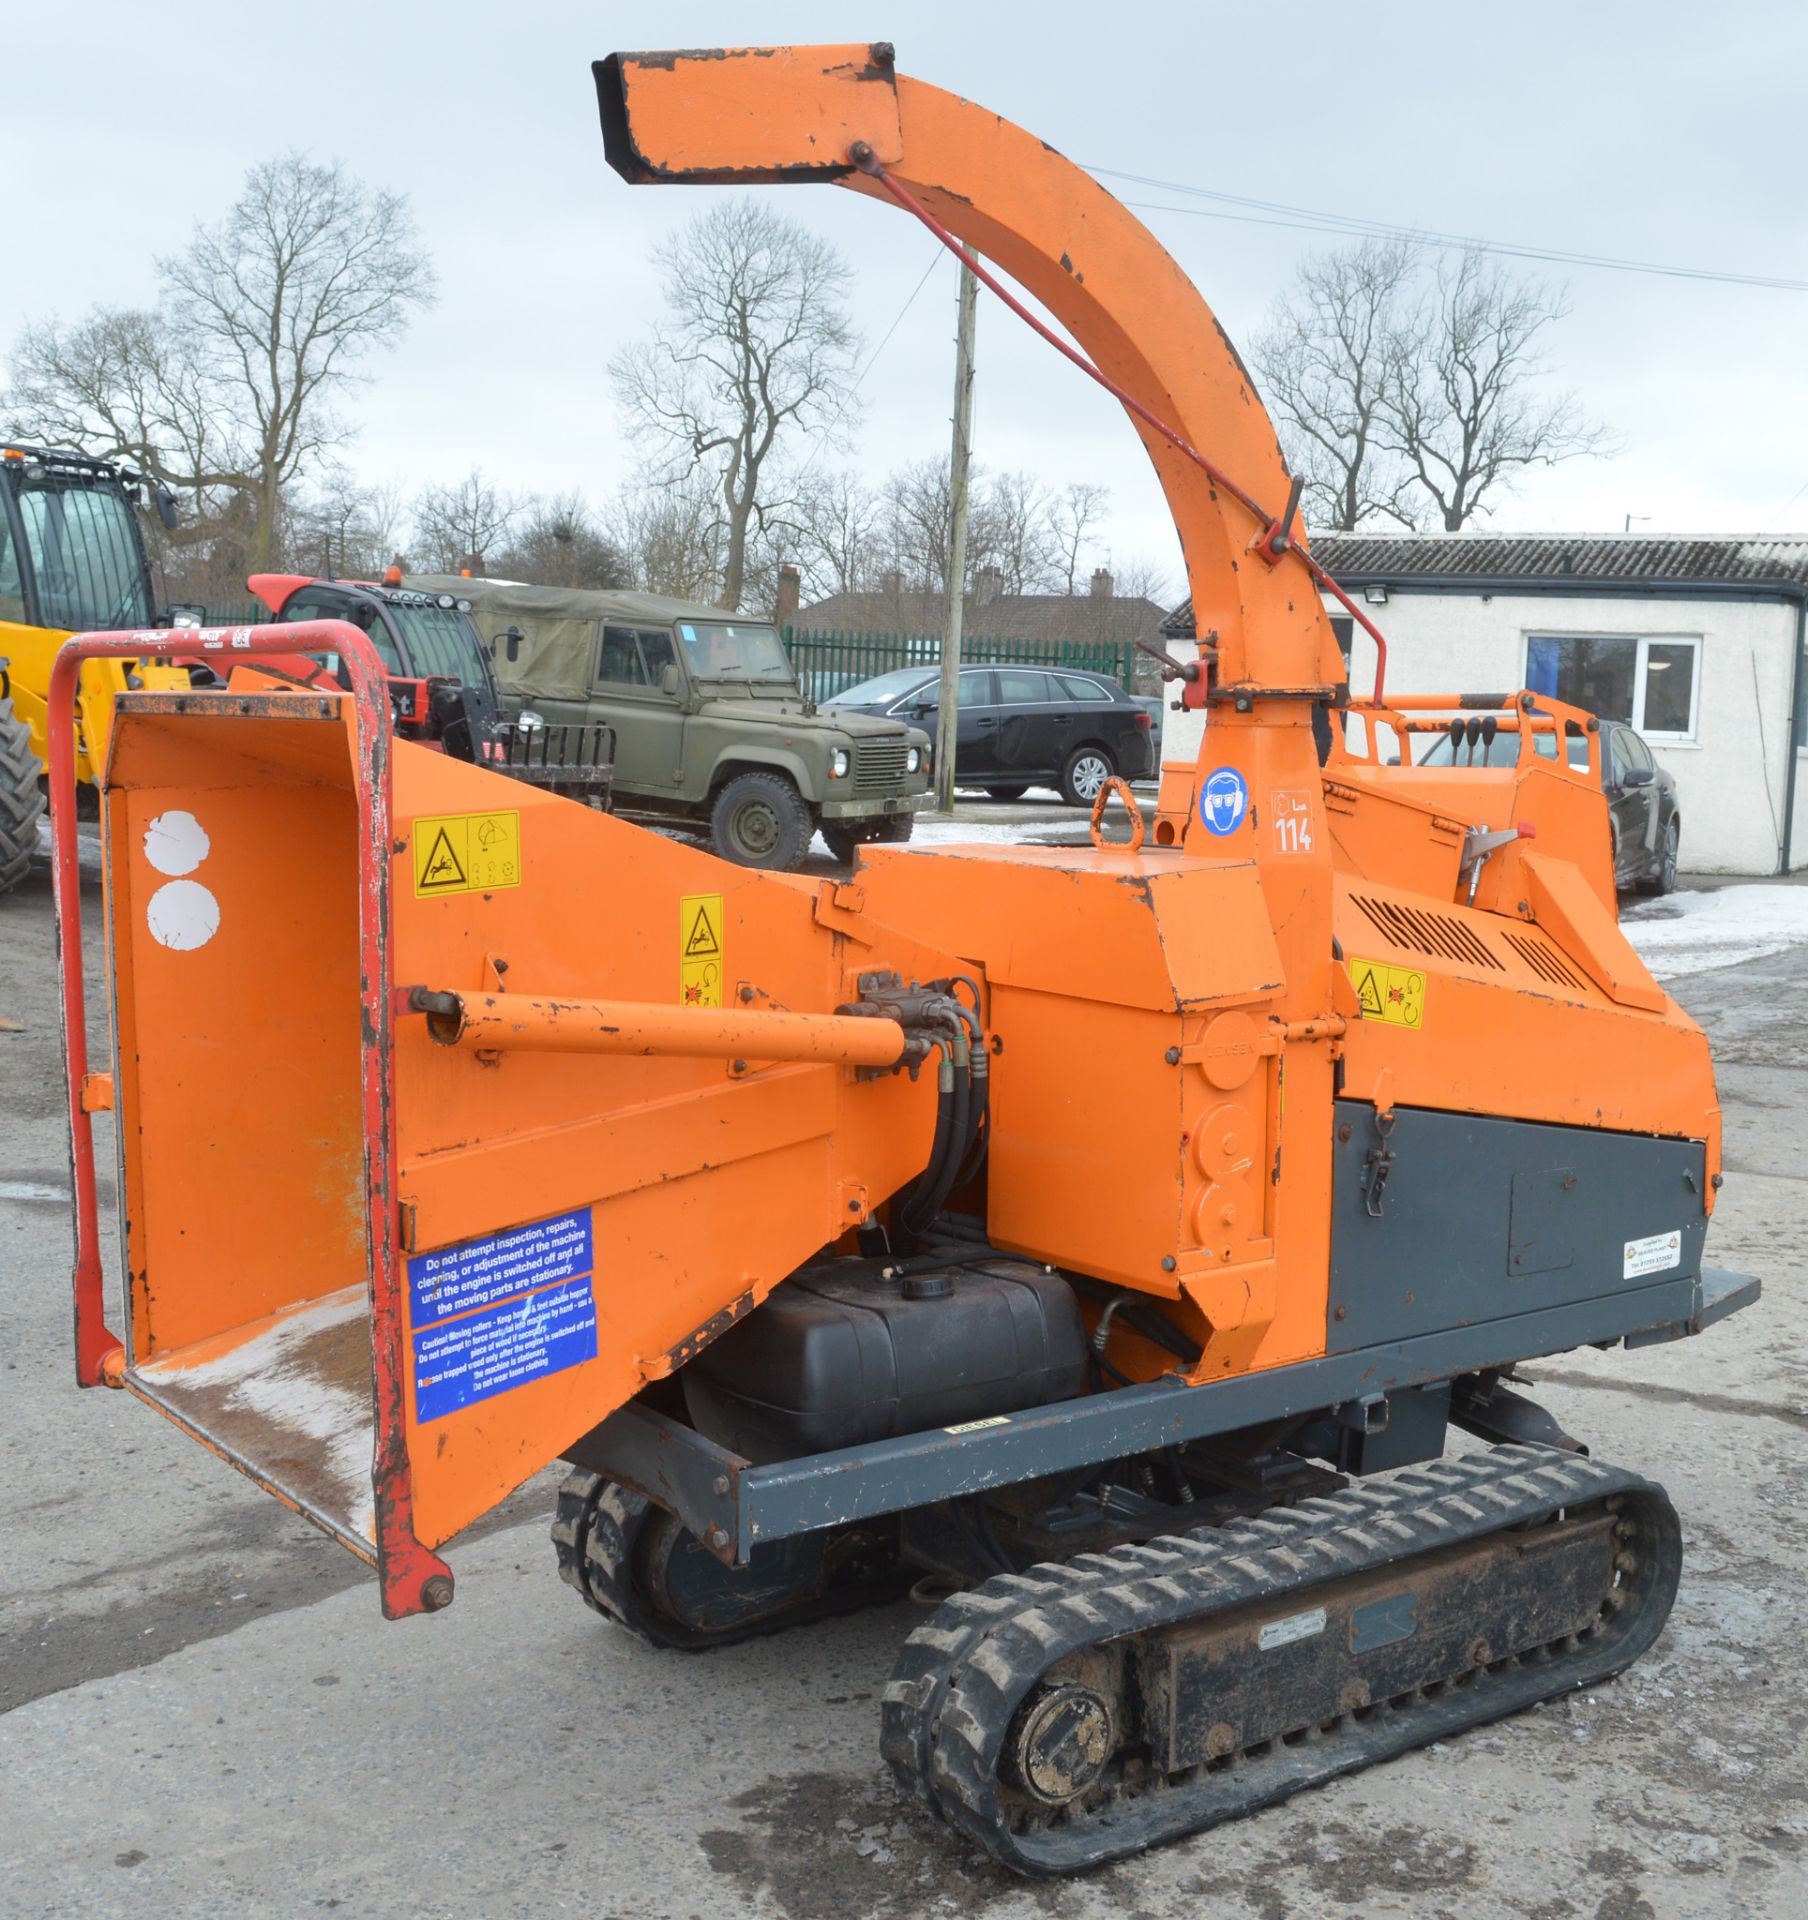 Jensen A530 rubber tracked mobile wood chipper  Year: 2007  S/N: 5507042220 Recorded hours: 1421